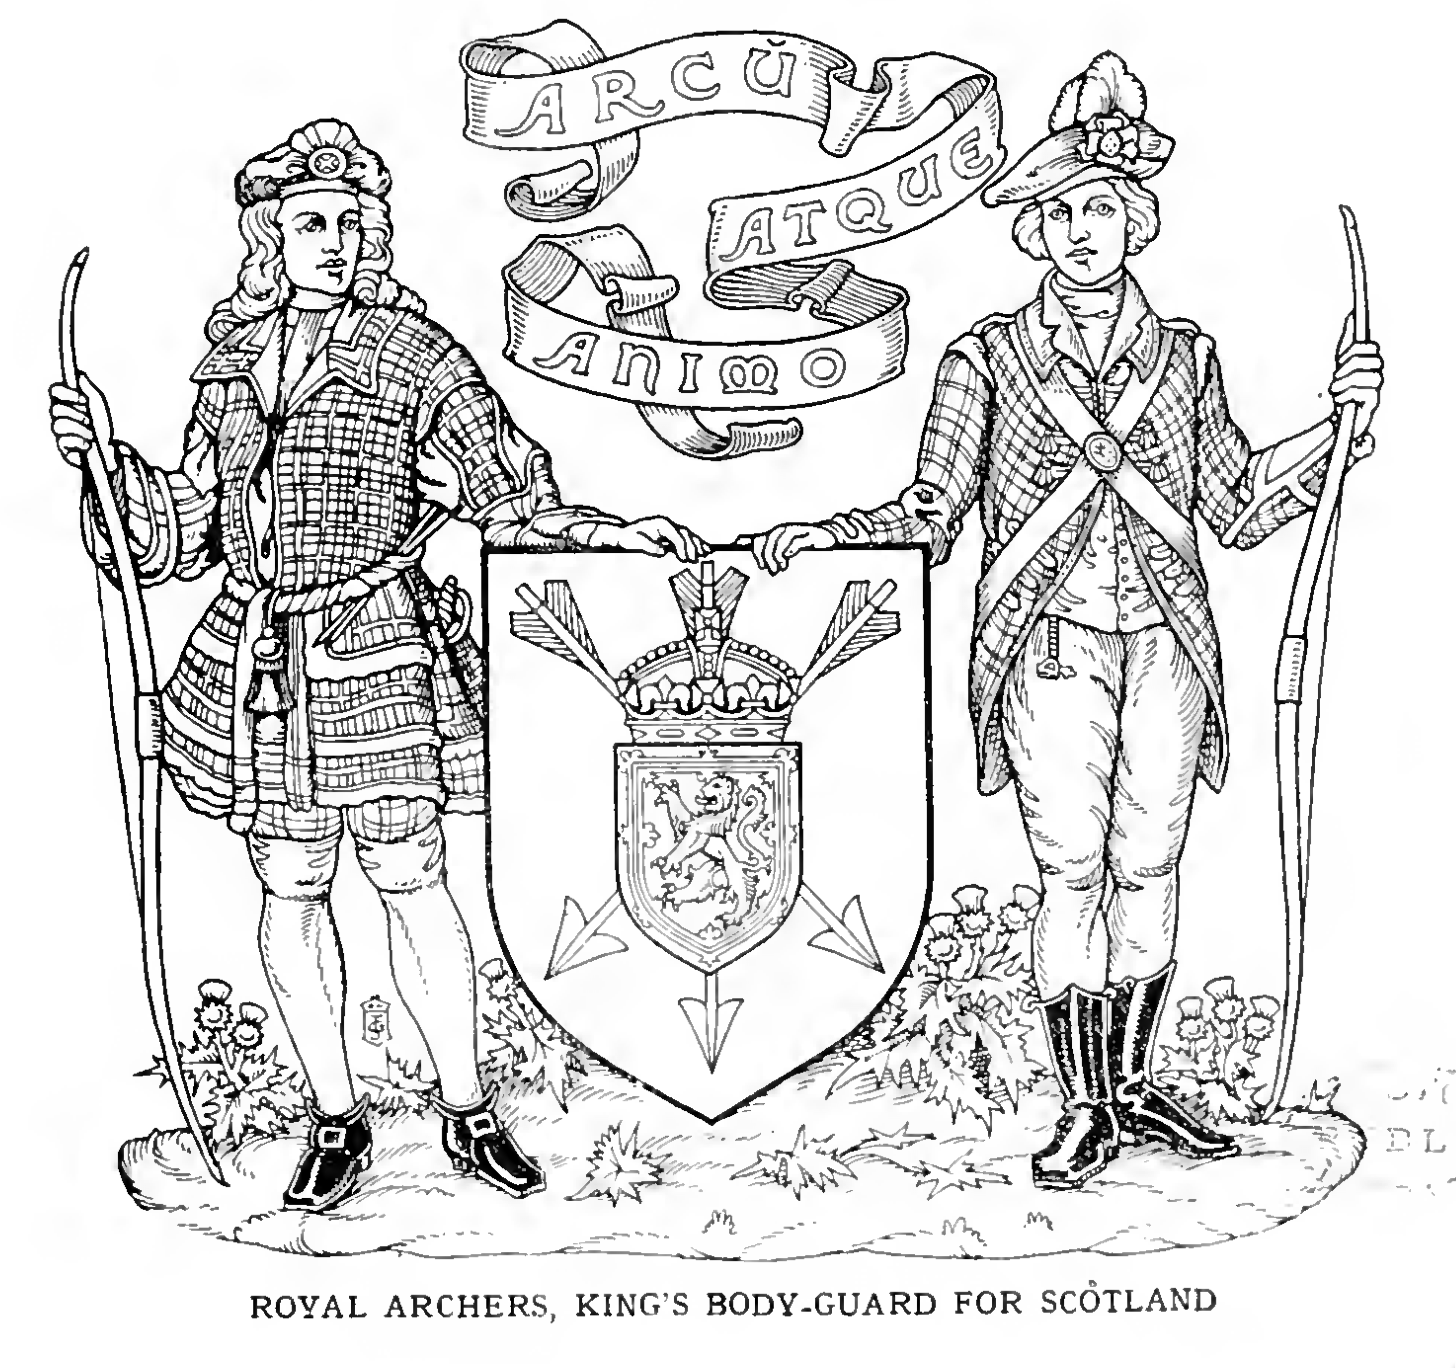 ARCHERS, The Royal Company of, The King's Body-Guard for Scotland.